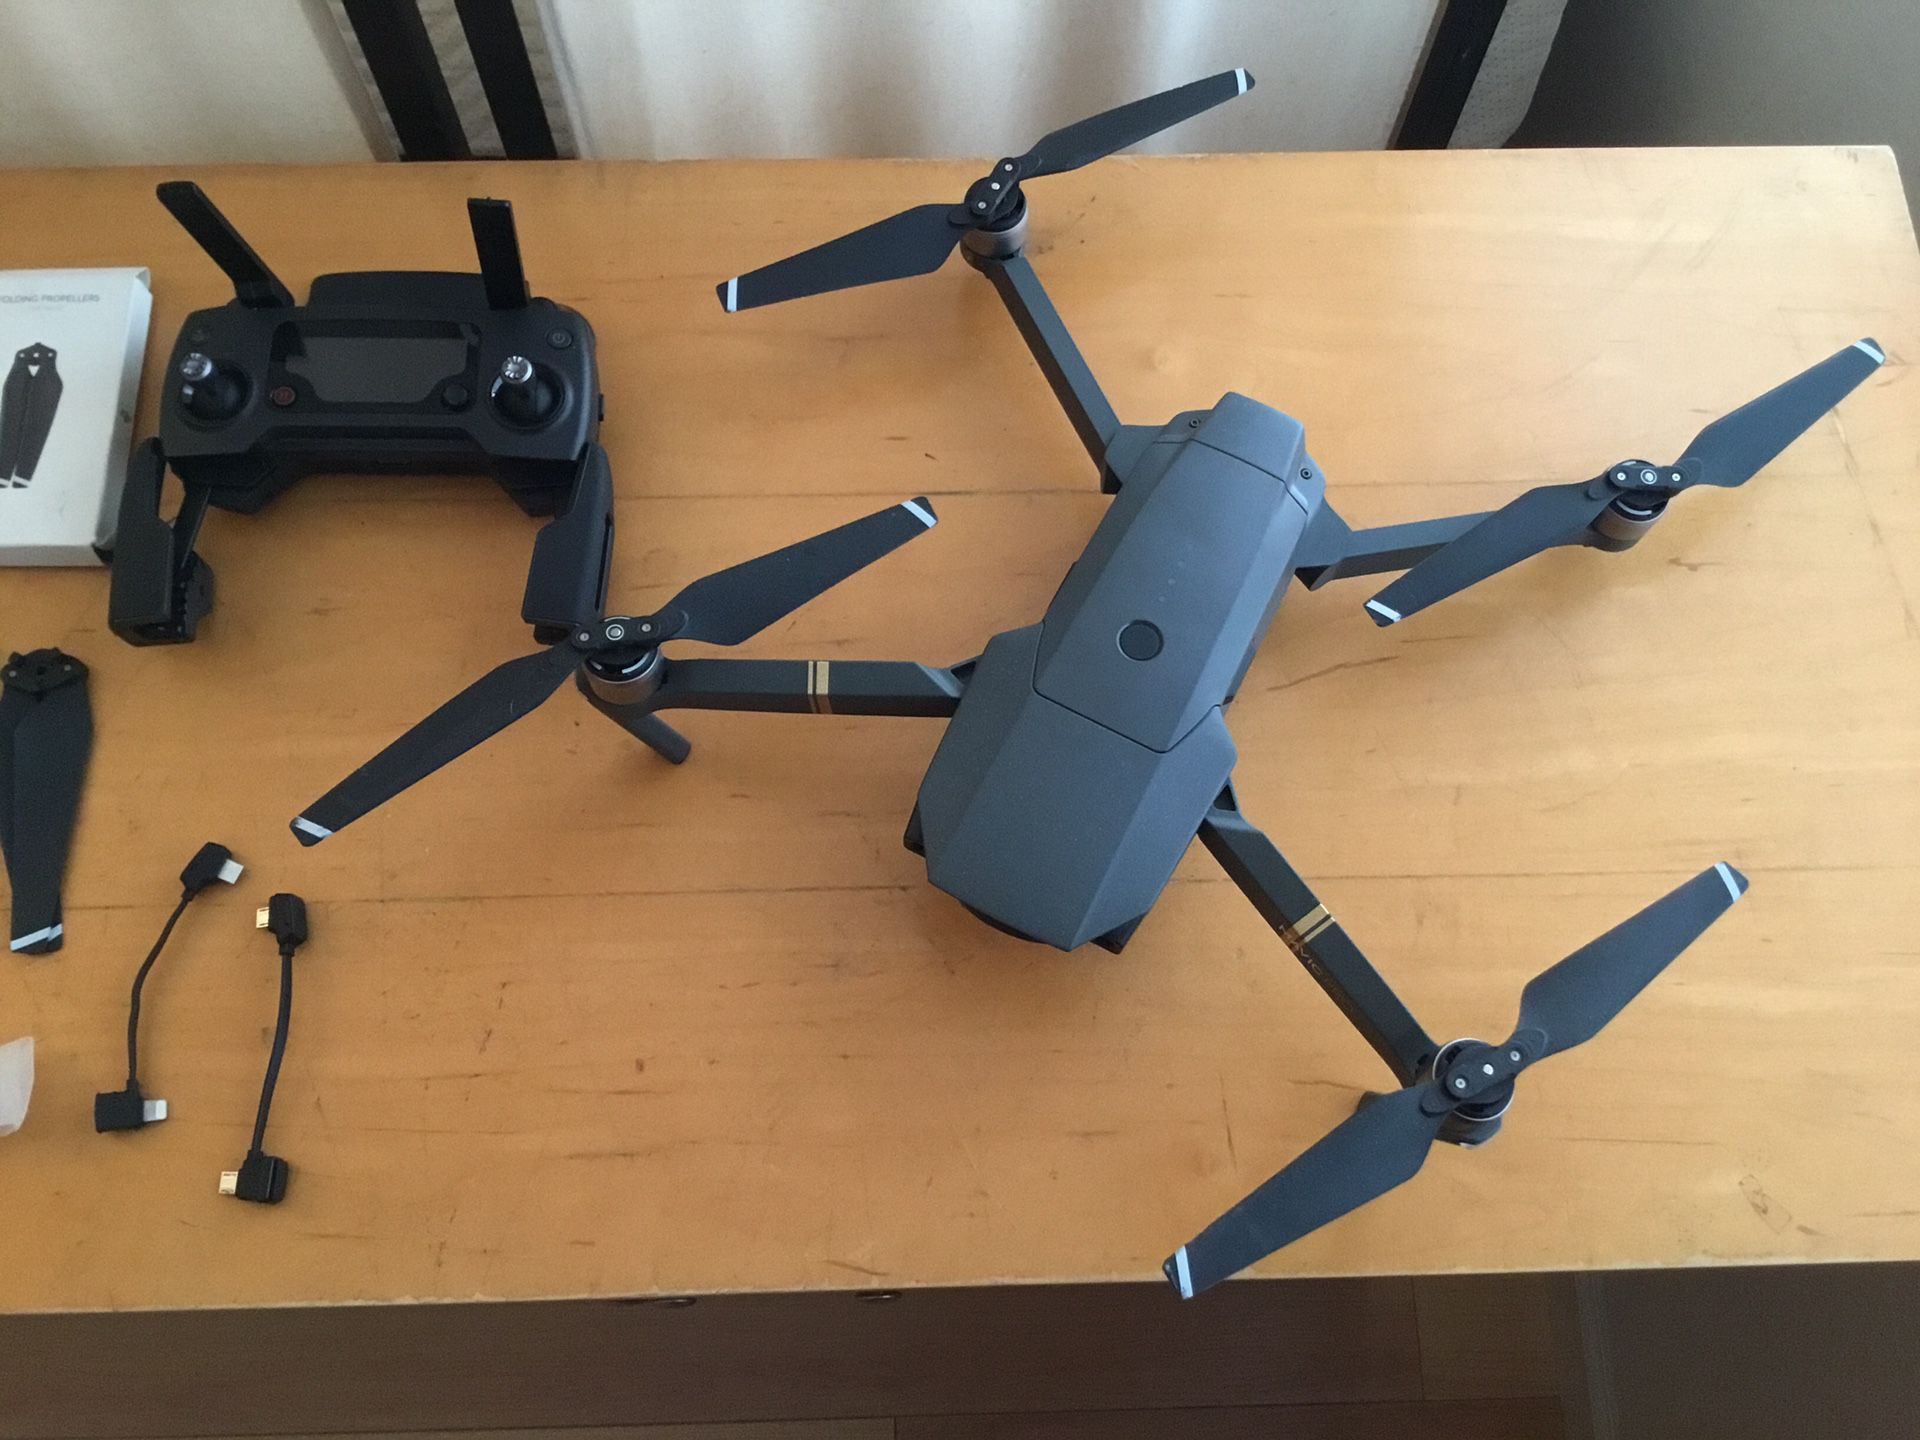 Mavic Pro Drone with Remote- comes with extra batteries and propellers $725 Firm